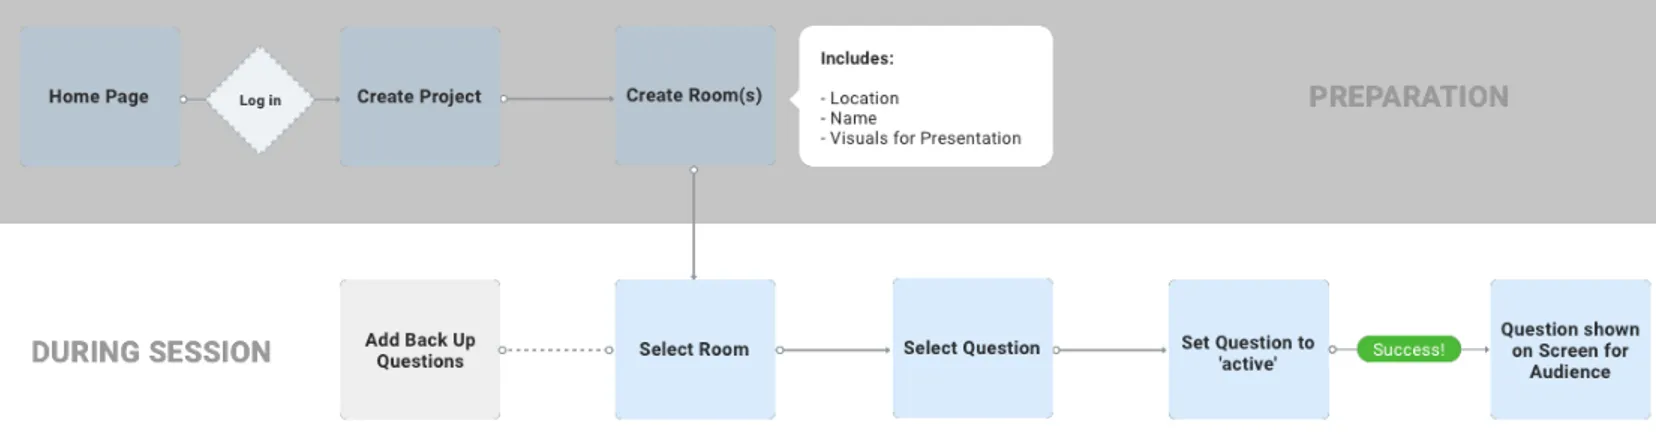 Figure 8. Task flow showing the relevant tasks for the moderator